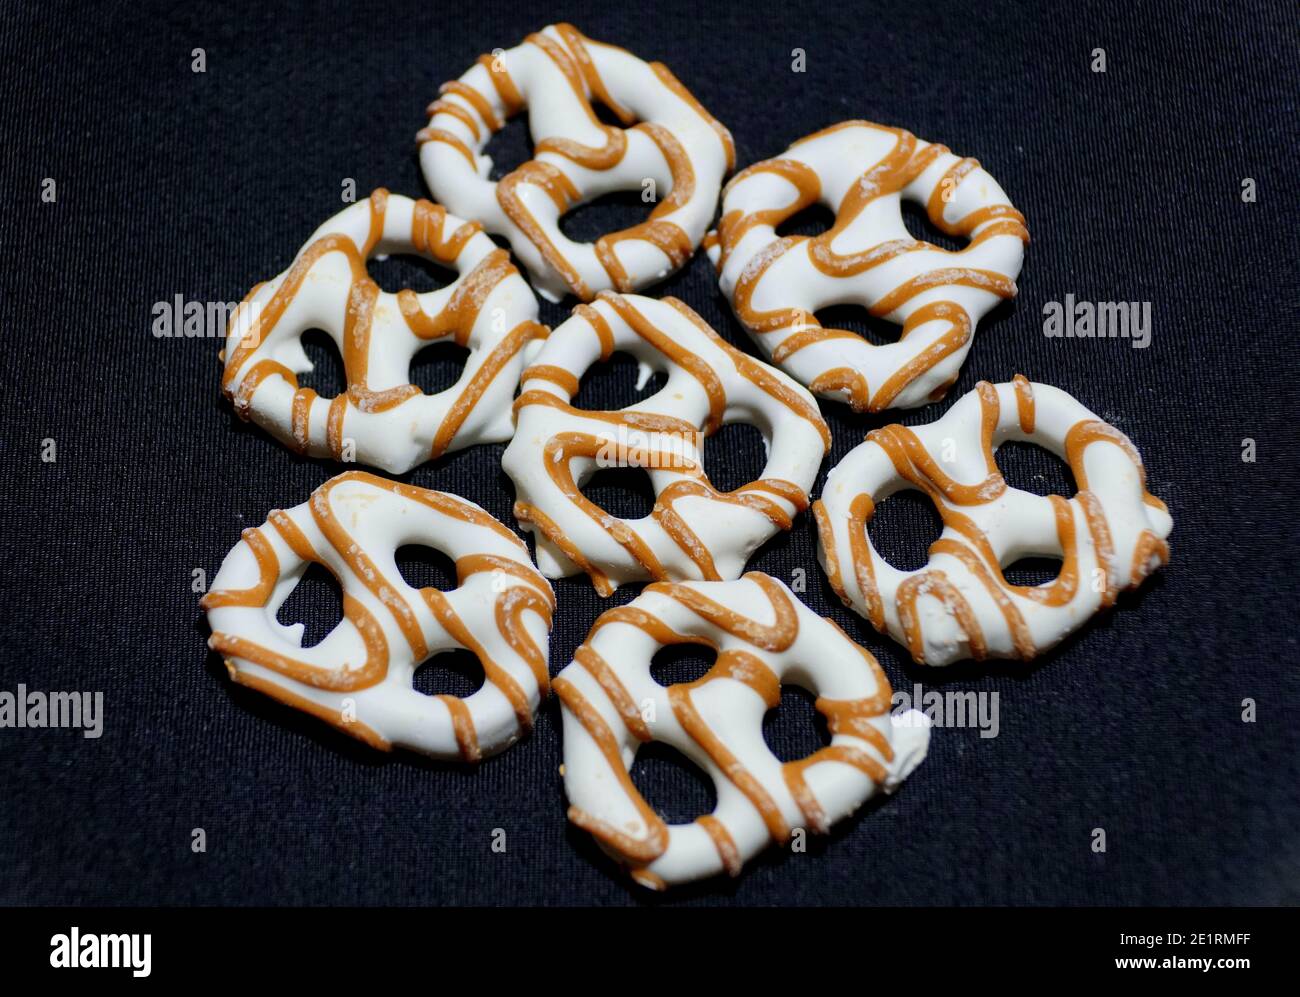 Yogurt pretzels with caramel drizzles on the isolated background Stock Photo